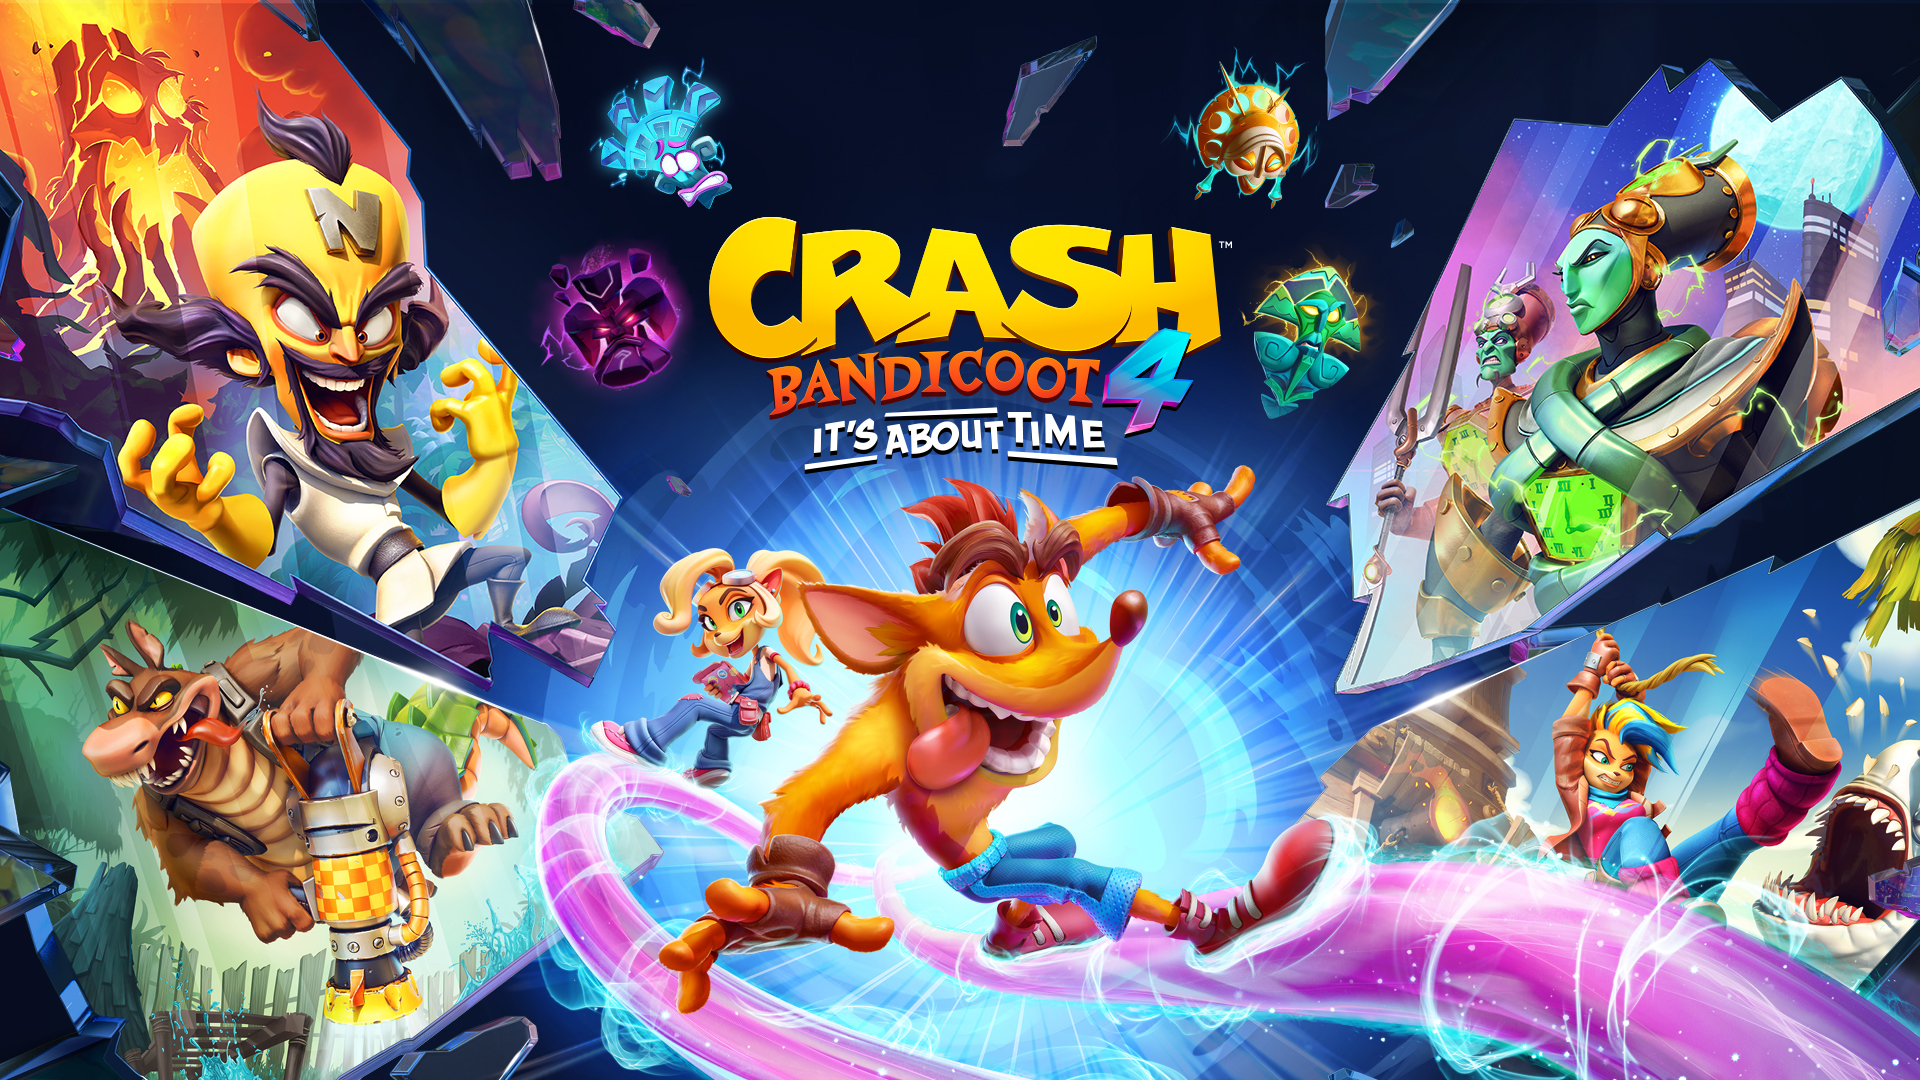 Crash Bandicoot 4 Coming to Switch, Xbox Series And PS5 This March 12th